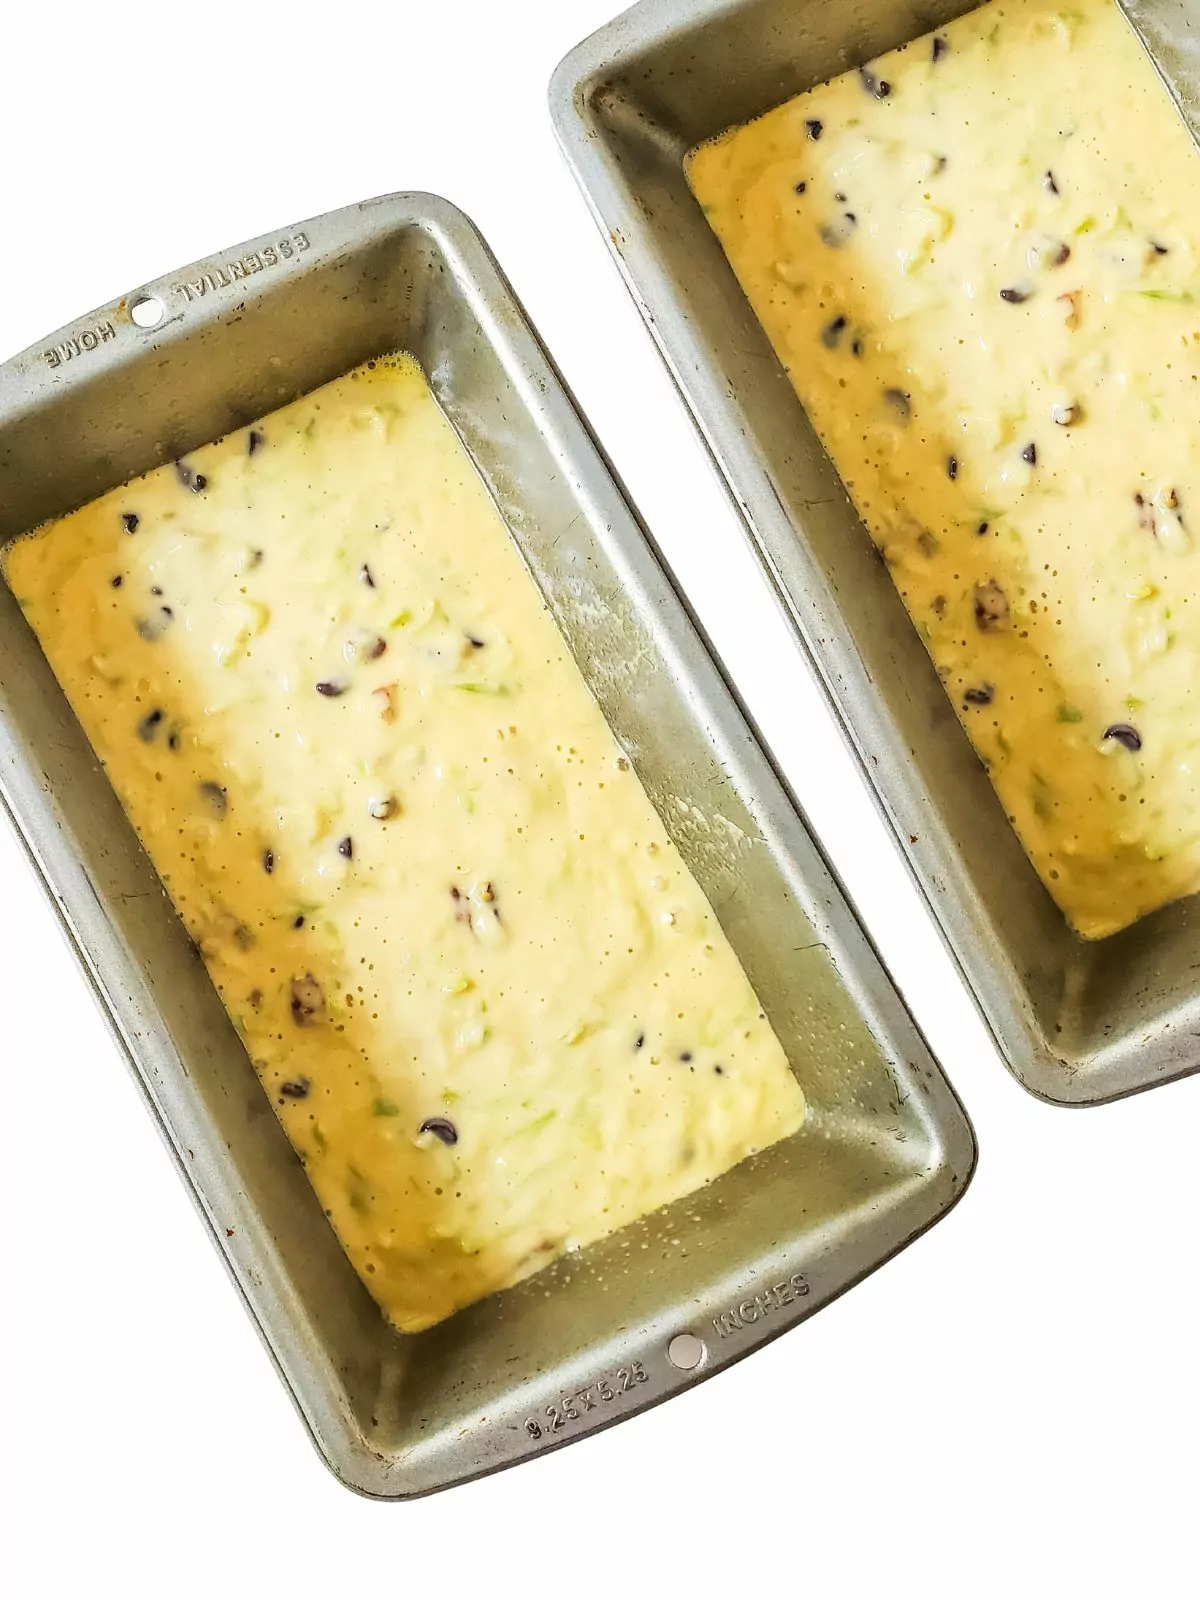 2 loaf pans of zucchini bread batter.